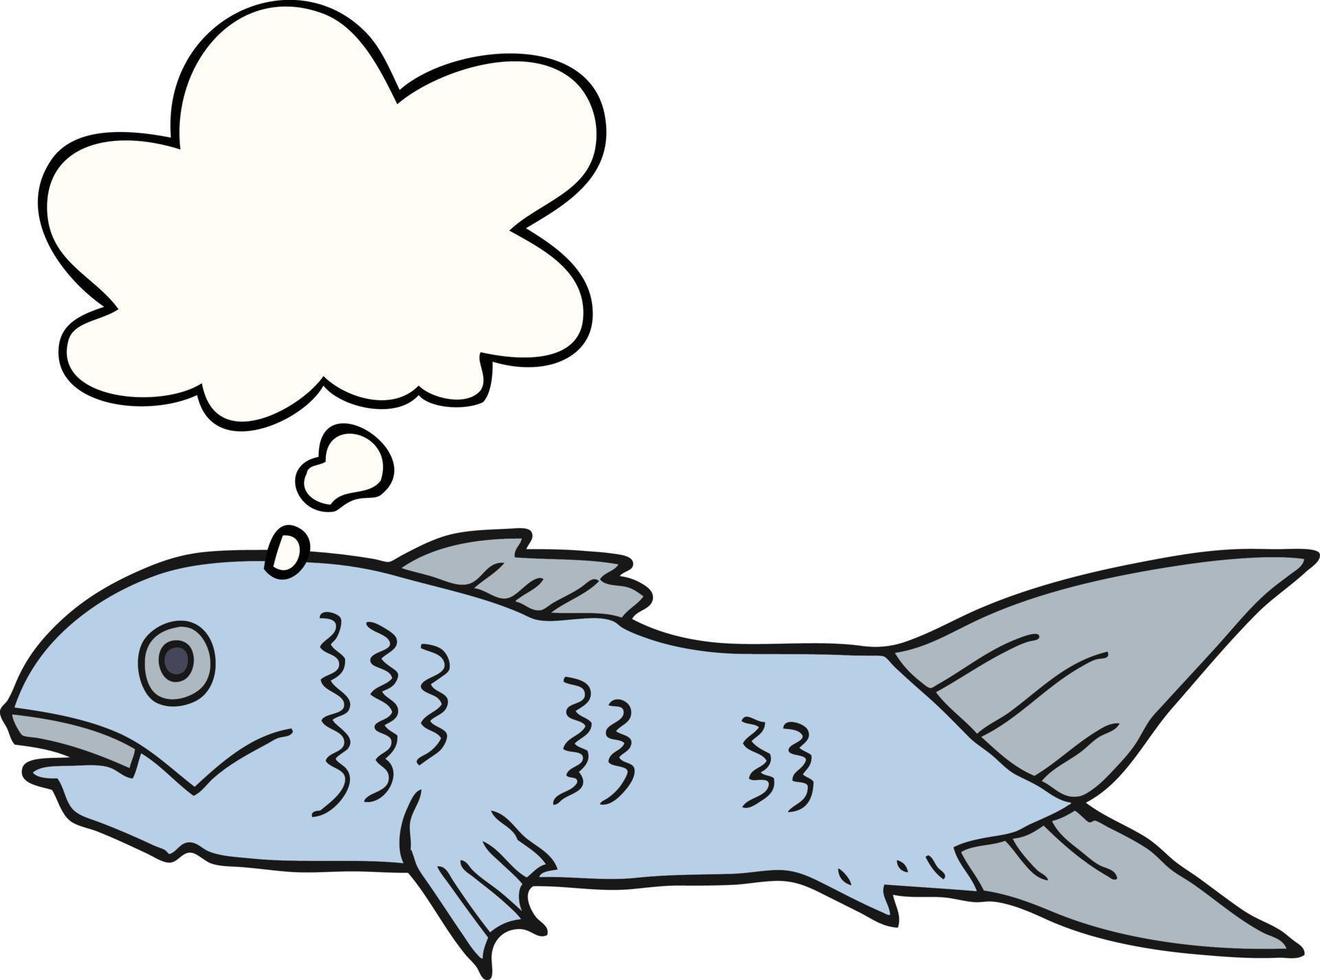 cartoon fish and thought bubble vector